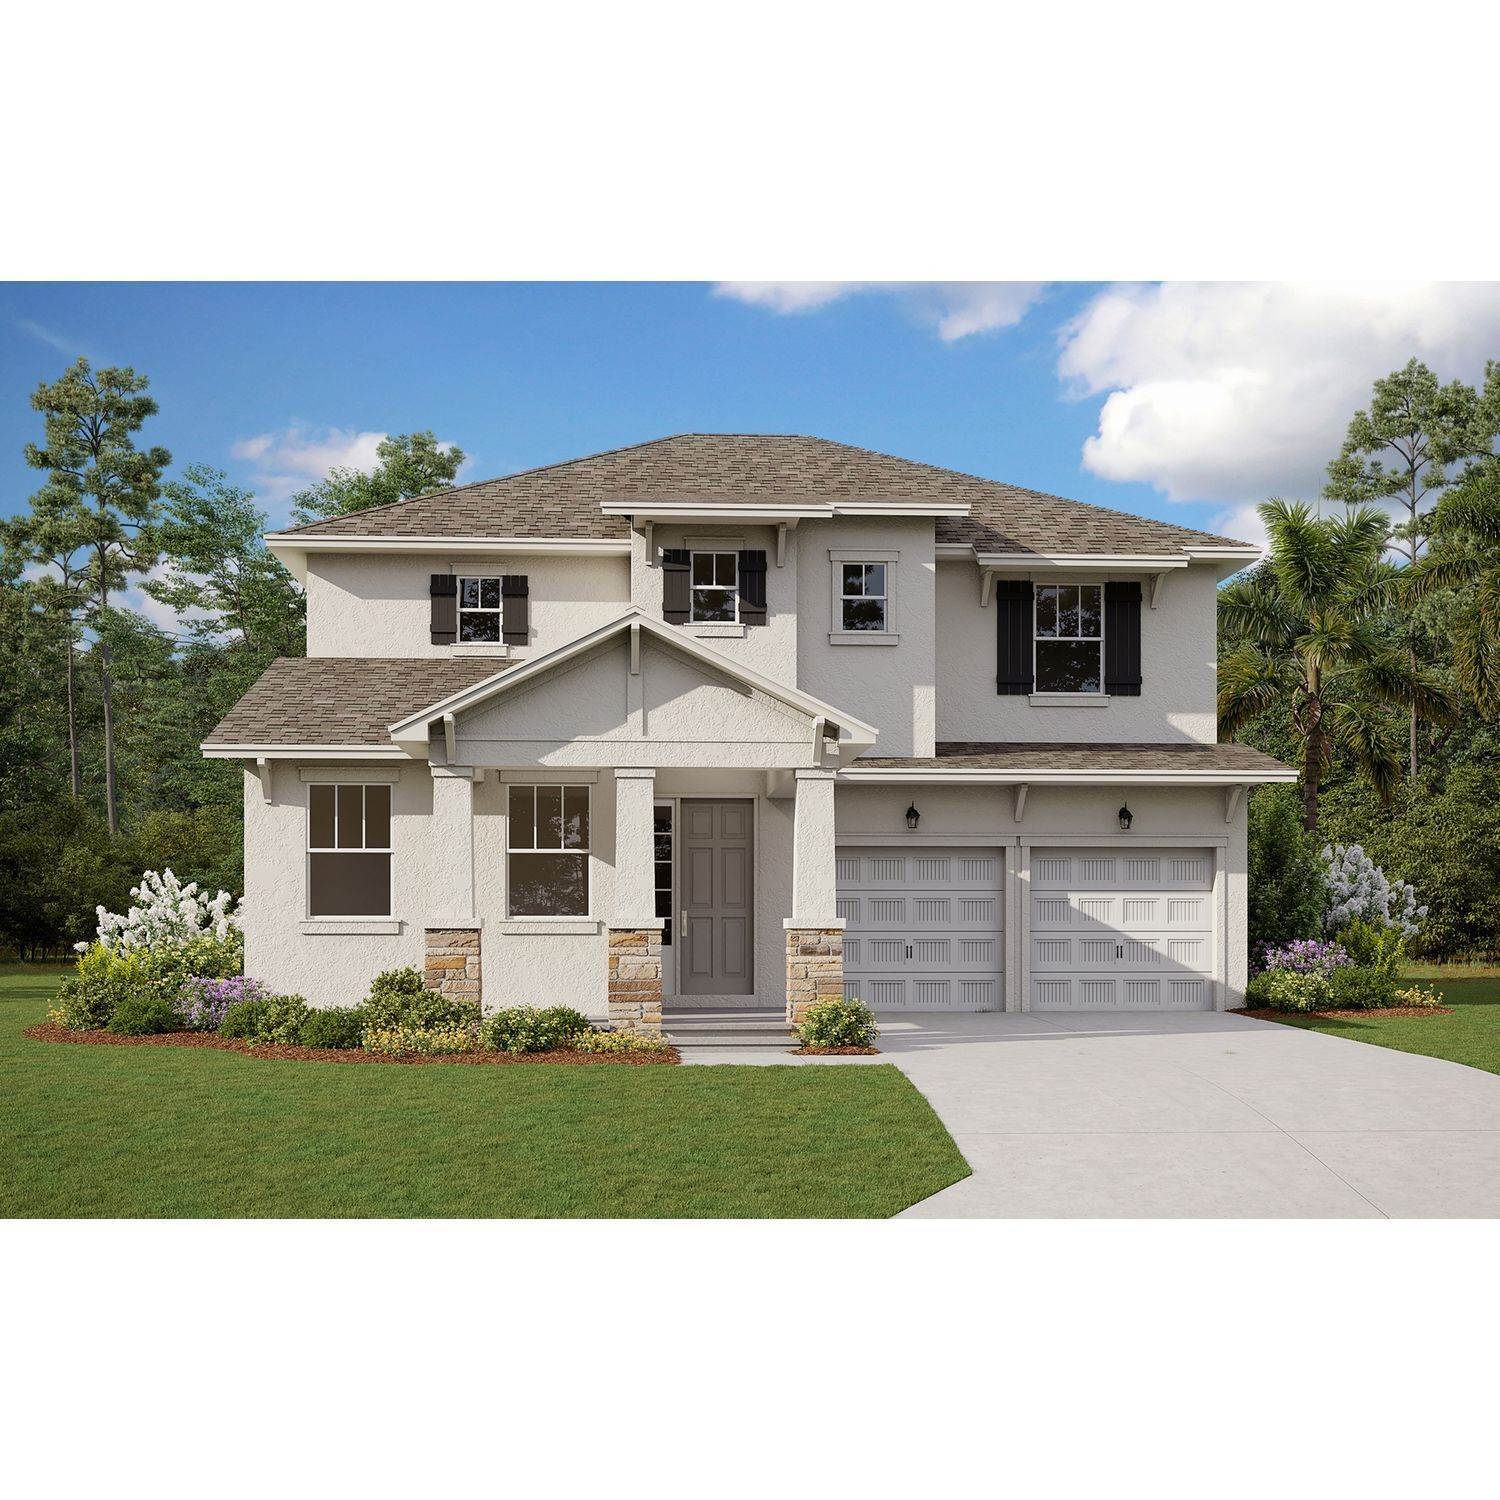 Single Family for Sale at Clermont, FL 34711